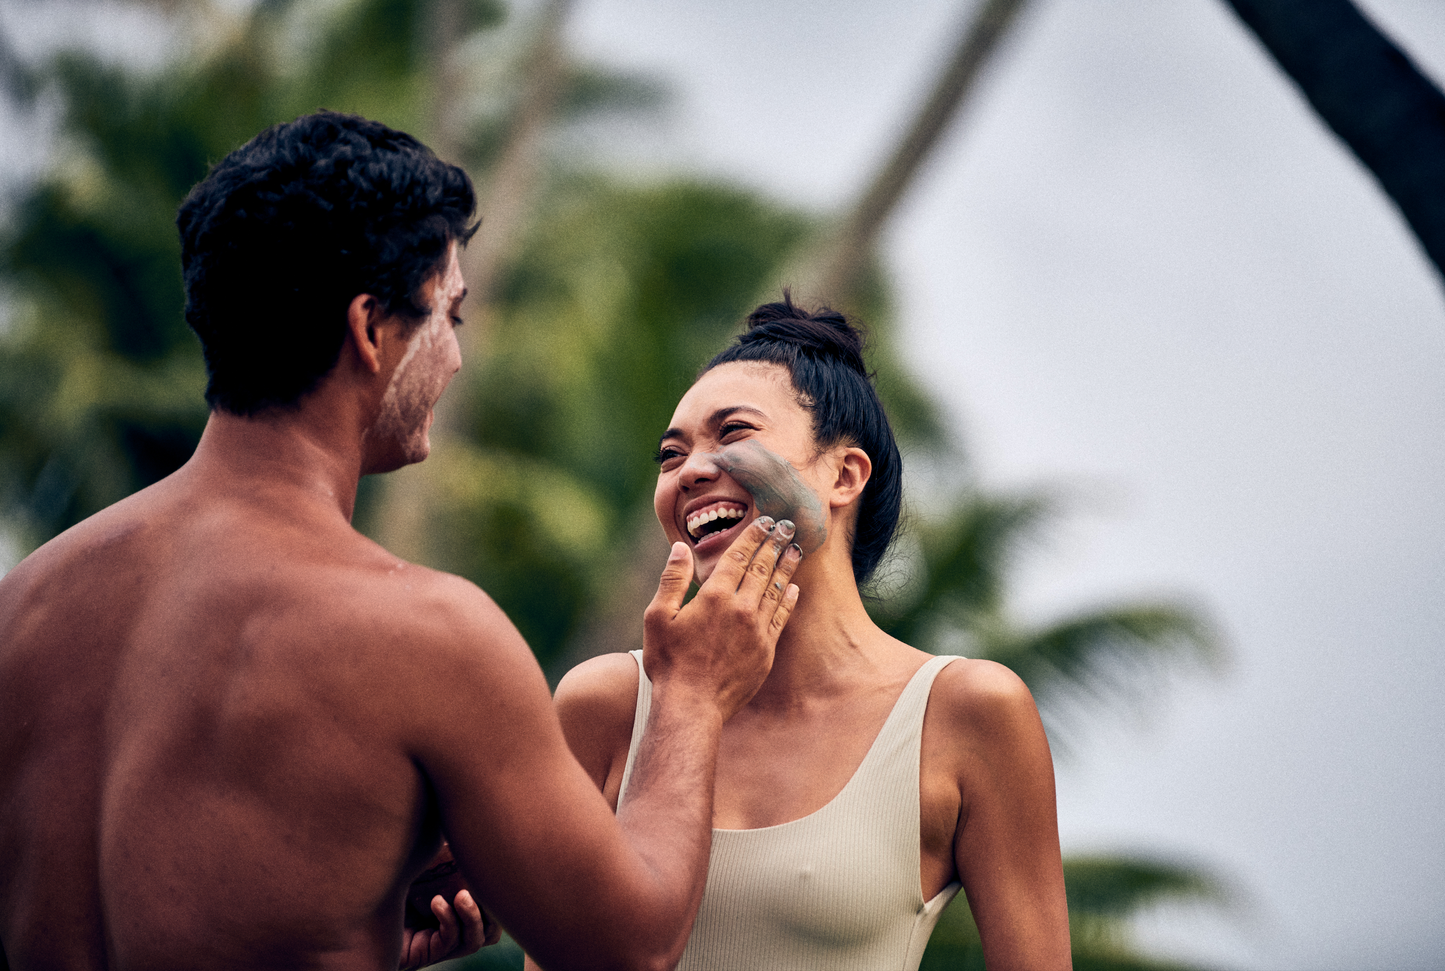 This image shows the Desesh US-made spa quality mineral face mask powder as an alternative to single use face mask sheets for a more environmentally friendly zero waste plastic free self care face mask routine. In the image a man is applying the charcoal mineral face mask powder to a woman while smiling